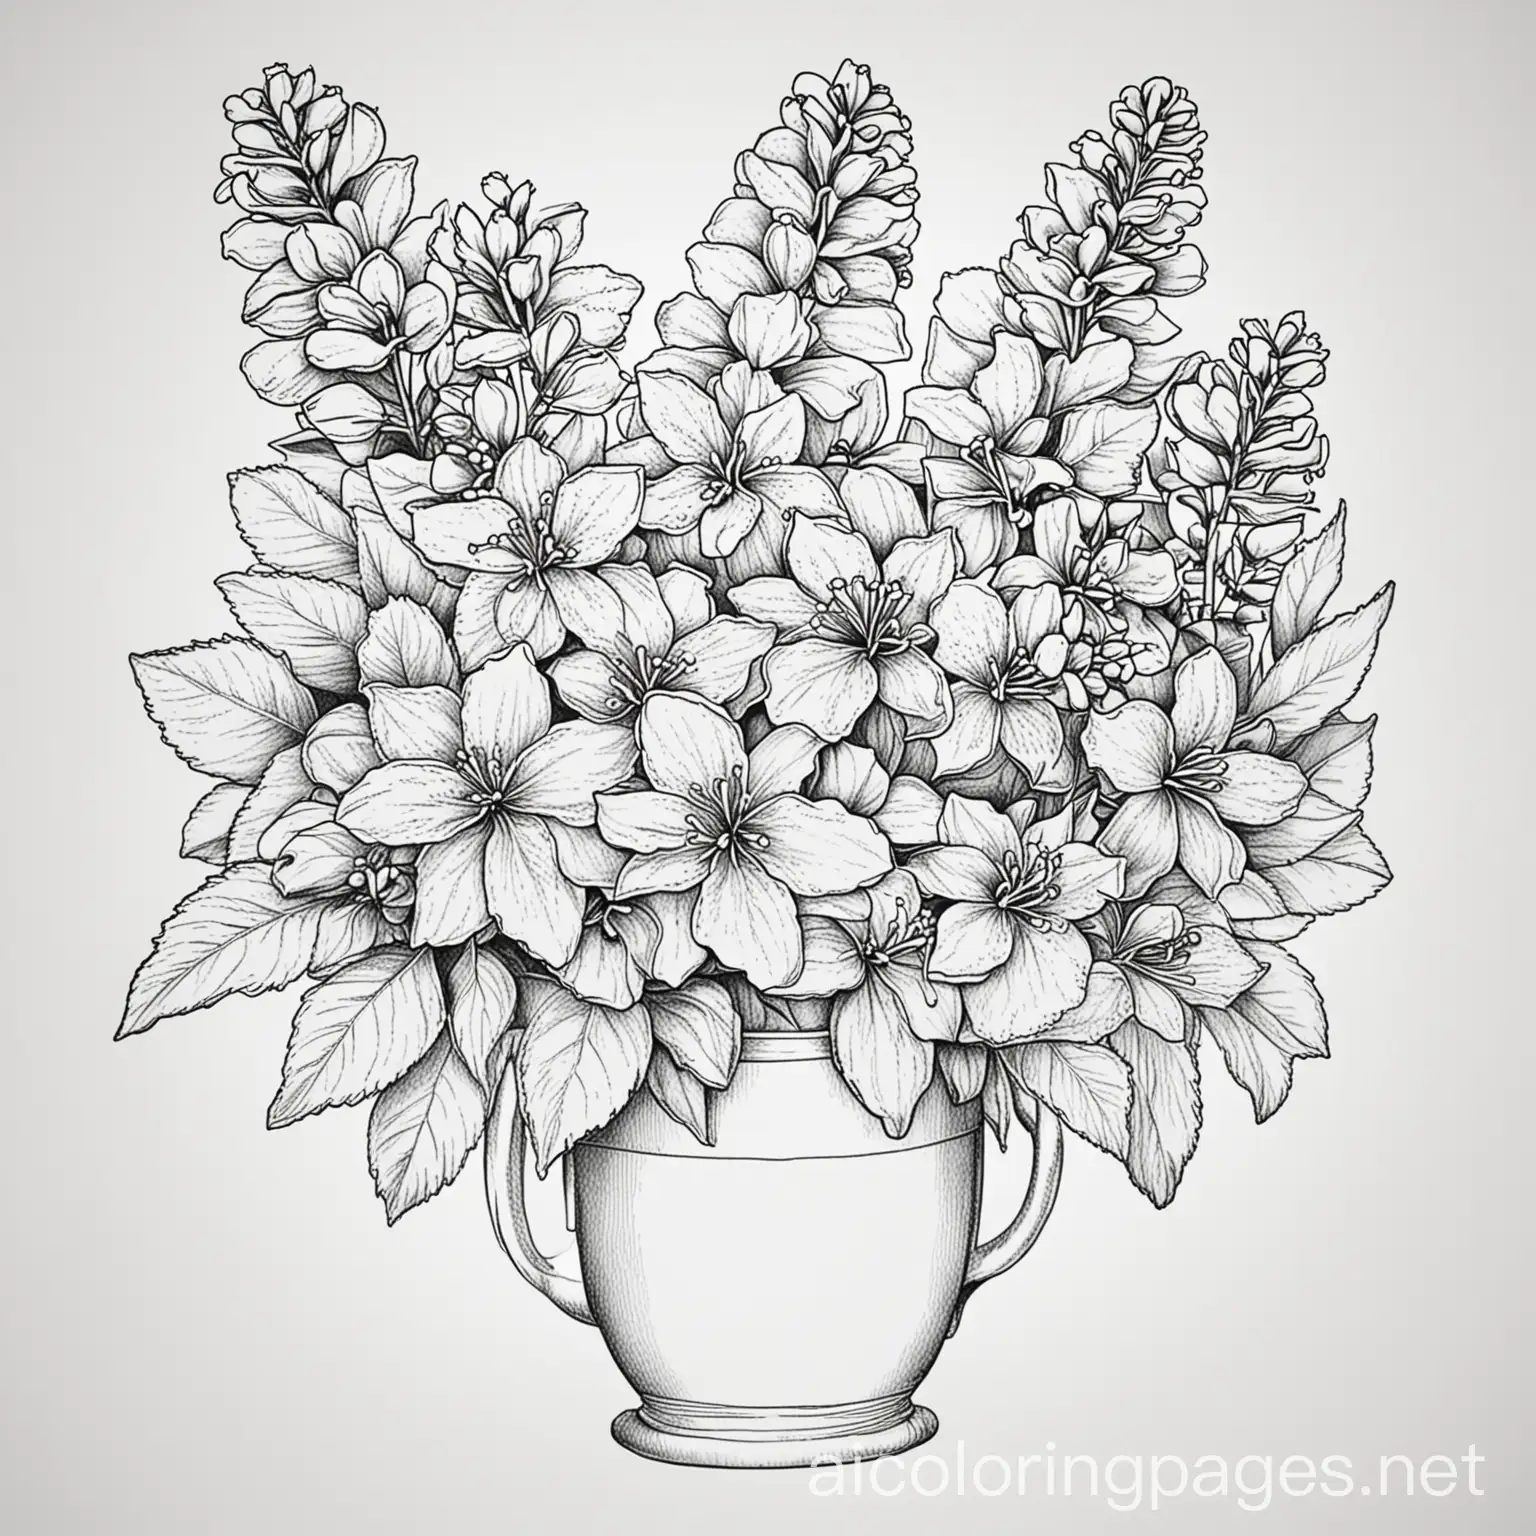 lilacs, Coloring Page, black and white, line art, white background, Simplicity, Ample White Space. The background of the coloring page is plain white to make it easy for young children to color within the lines. The outlines of all the subjects are easy to distinguish, making it simple for kids to color without too much difficulty